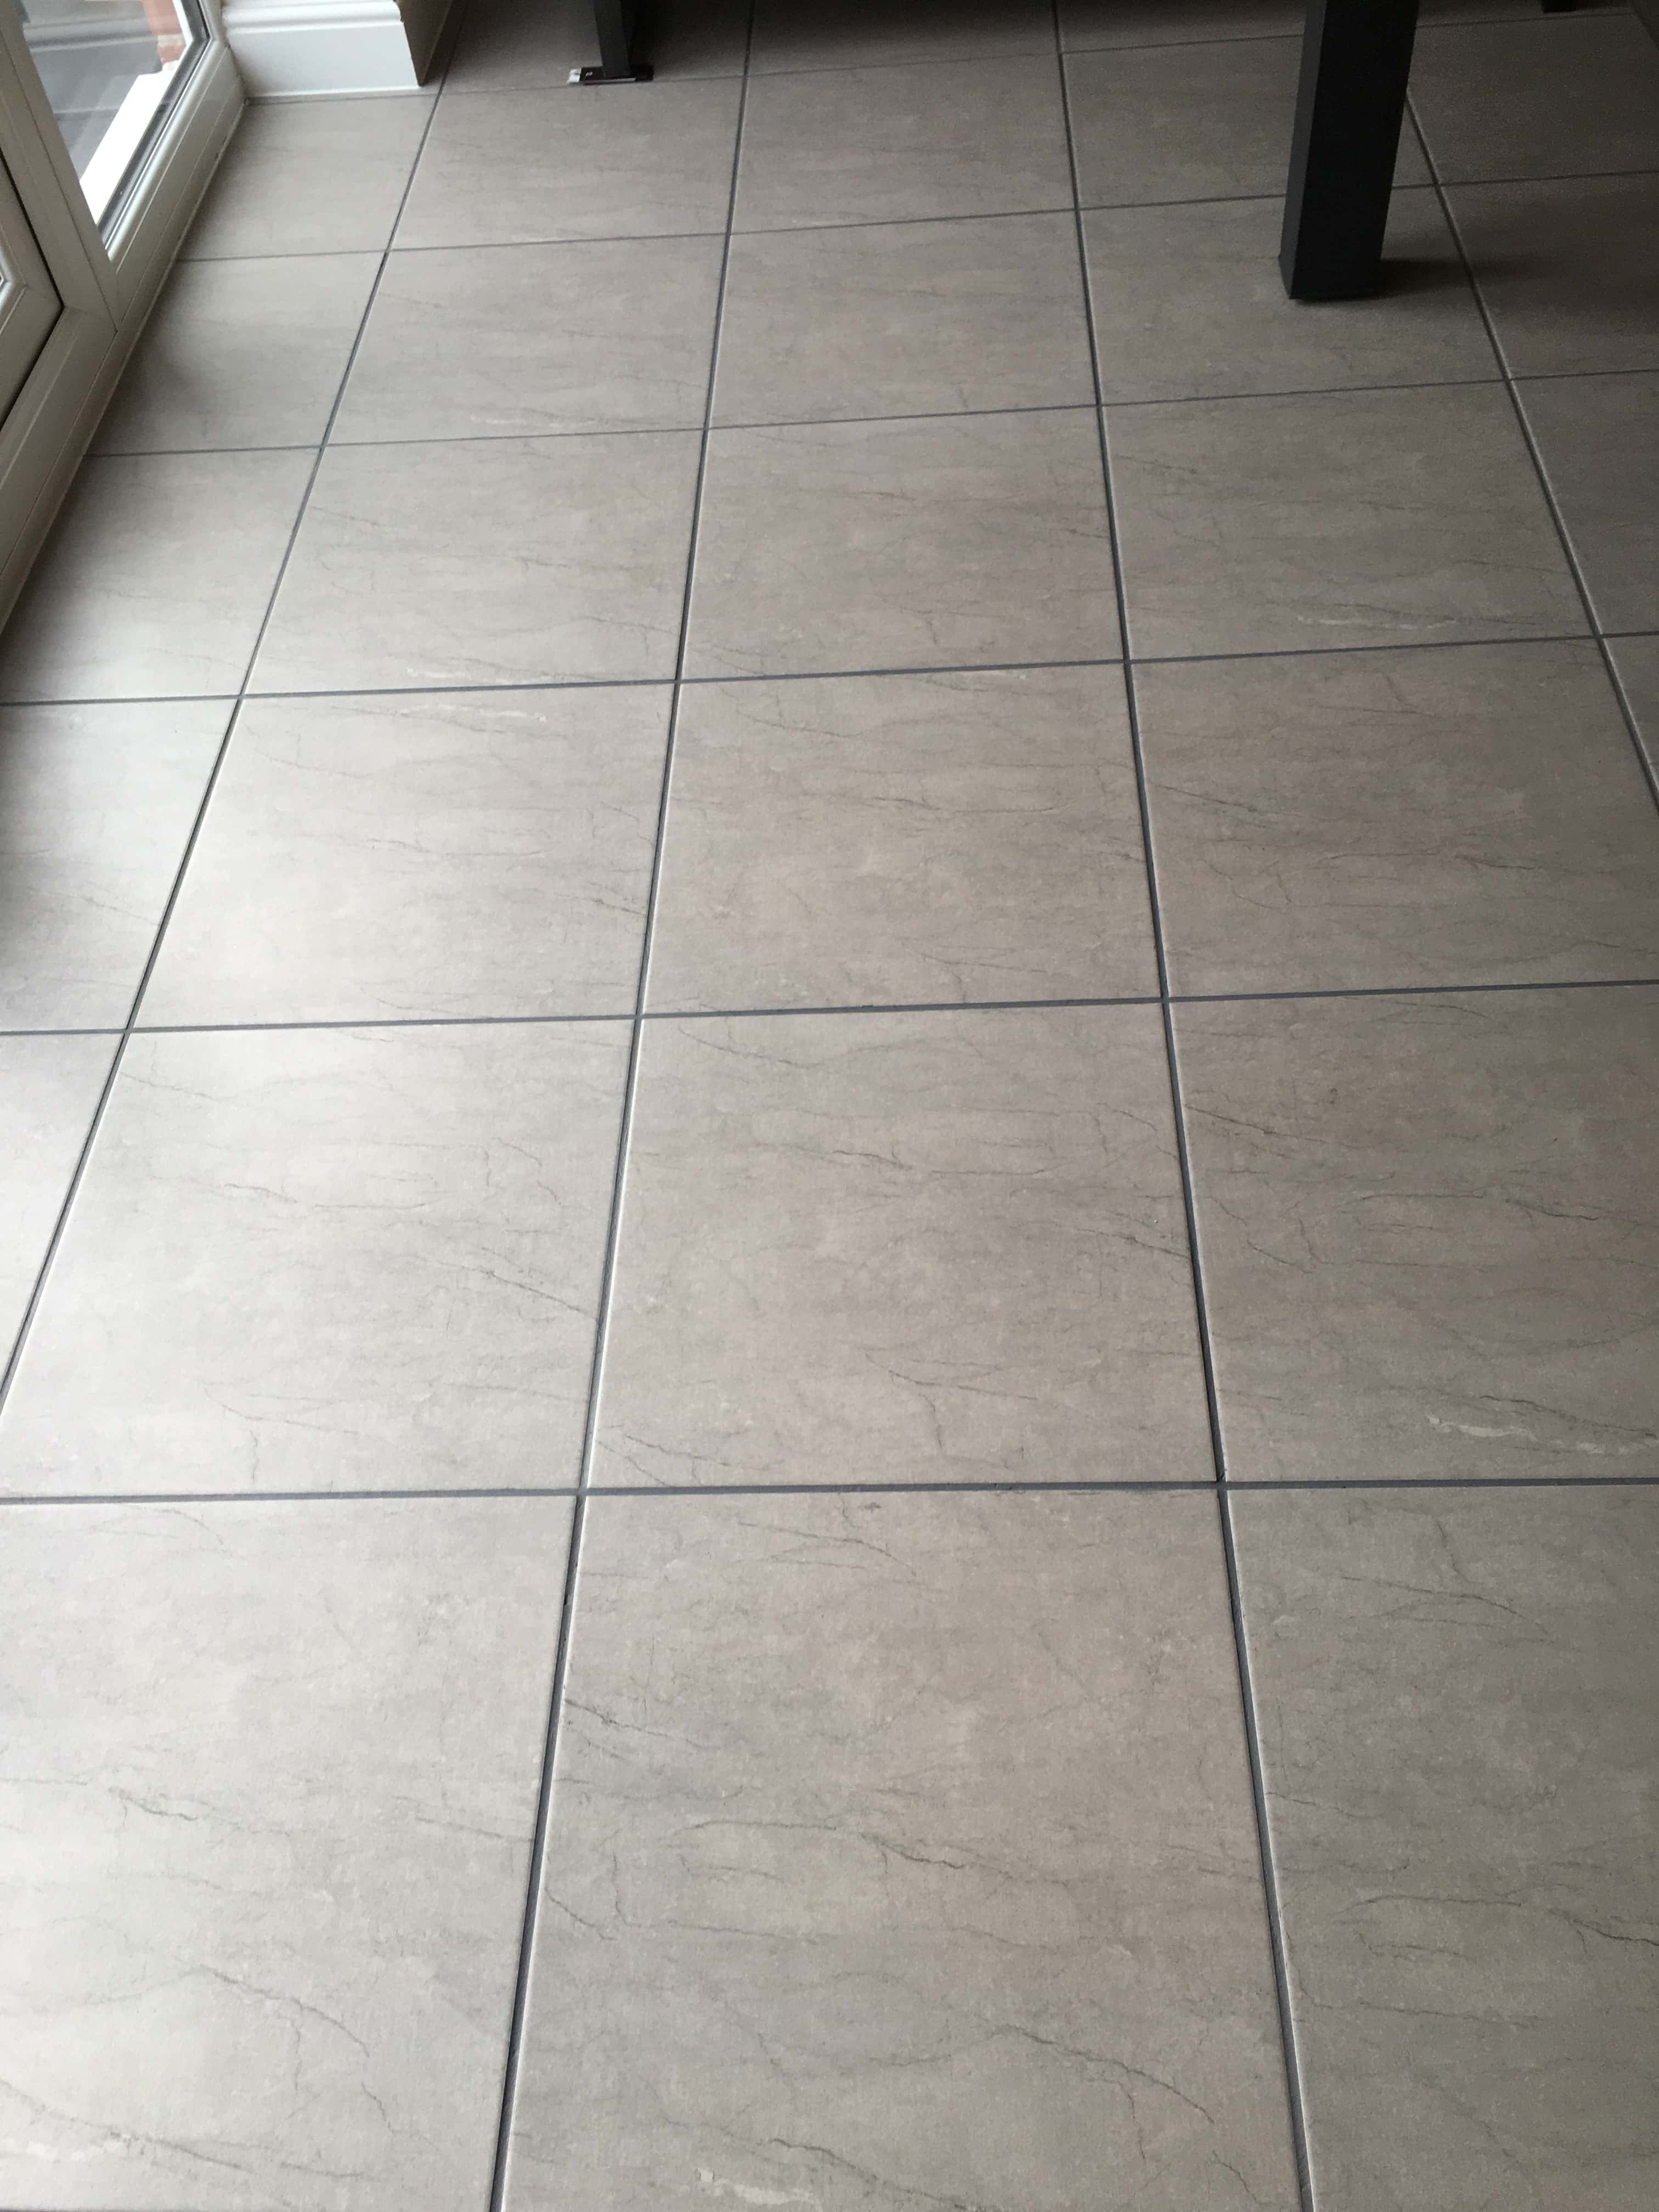 Ceramic Tiled Floor After Grout Colouring Shrewsbury